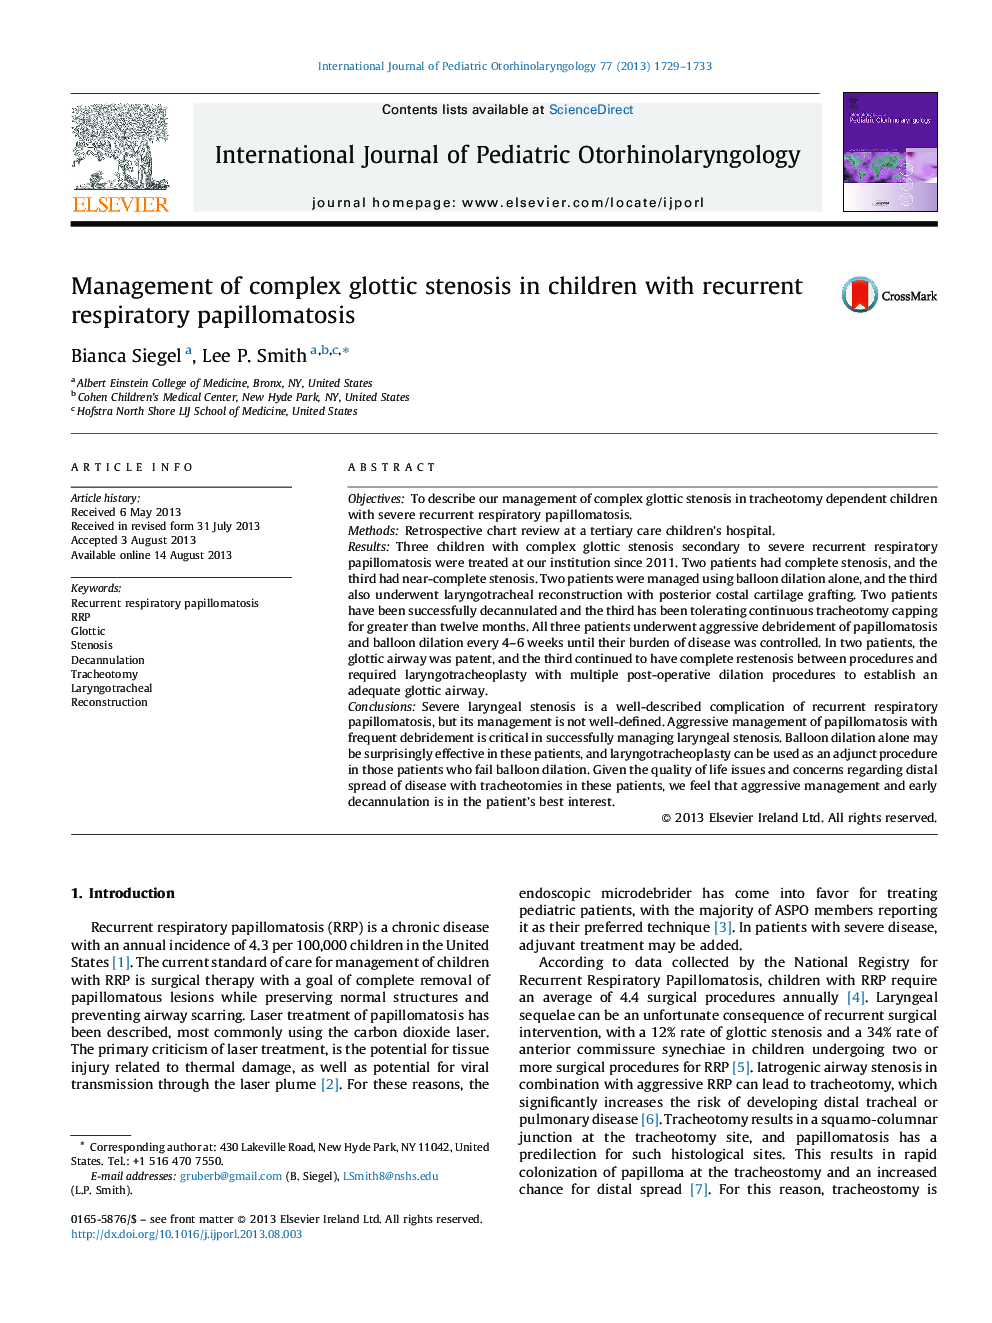 Management of complex glottic stenosis in children with recurrent respiratory papillomatosis